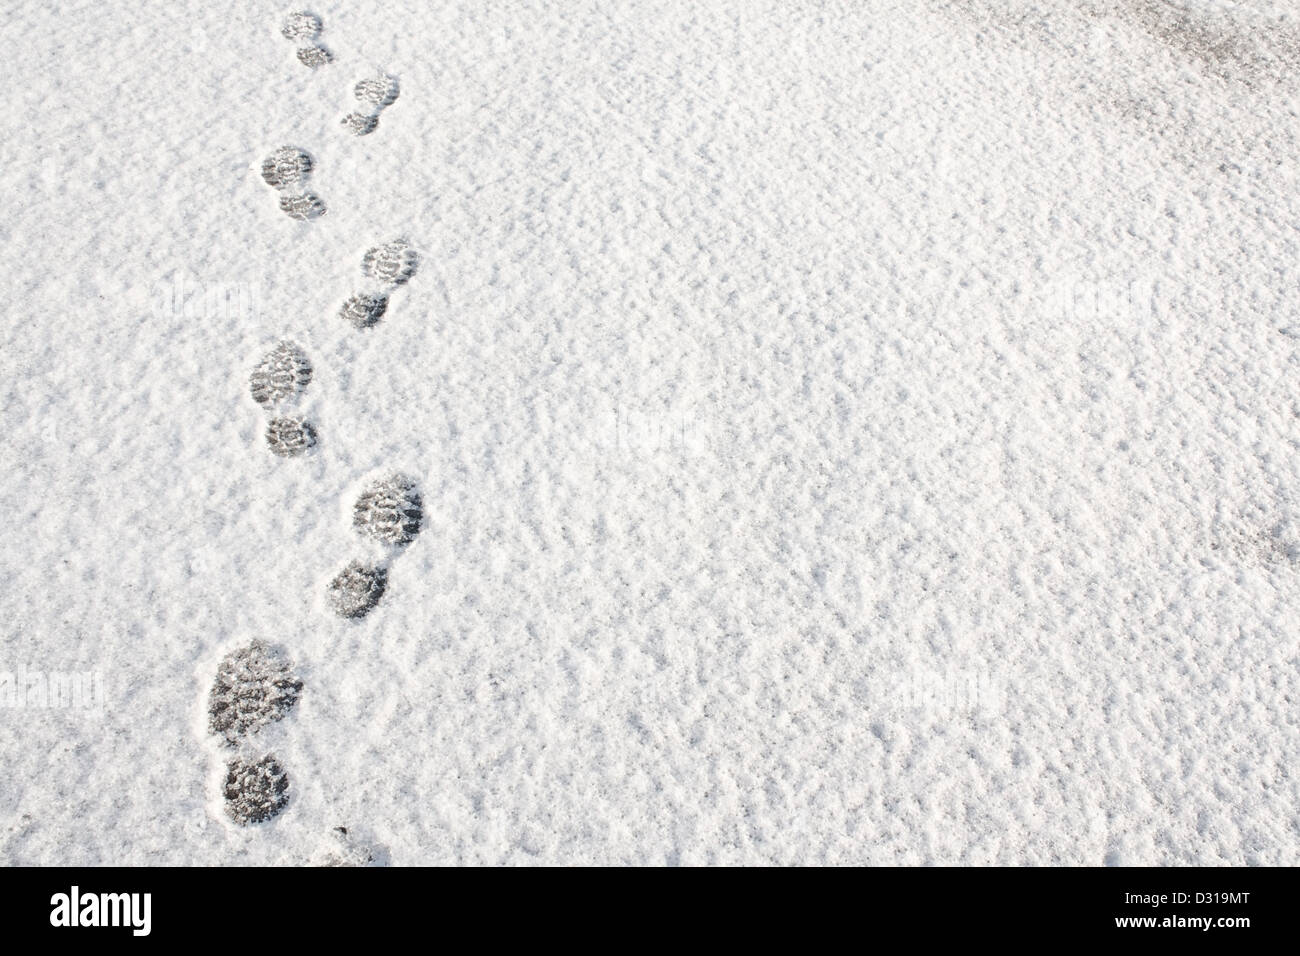 Footprints in fresh snow background great concept for winter footwear Stock Photo